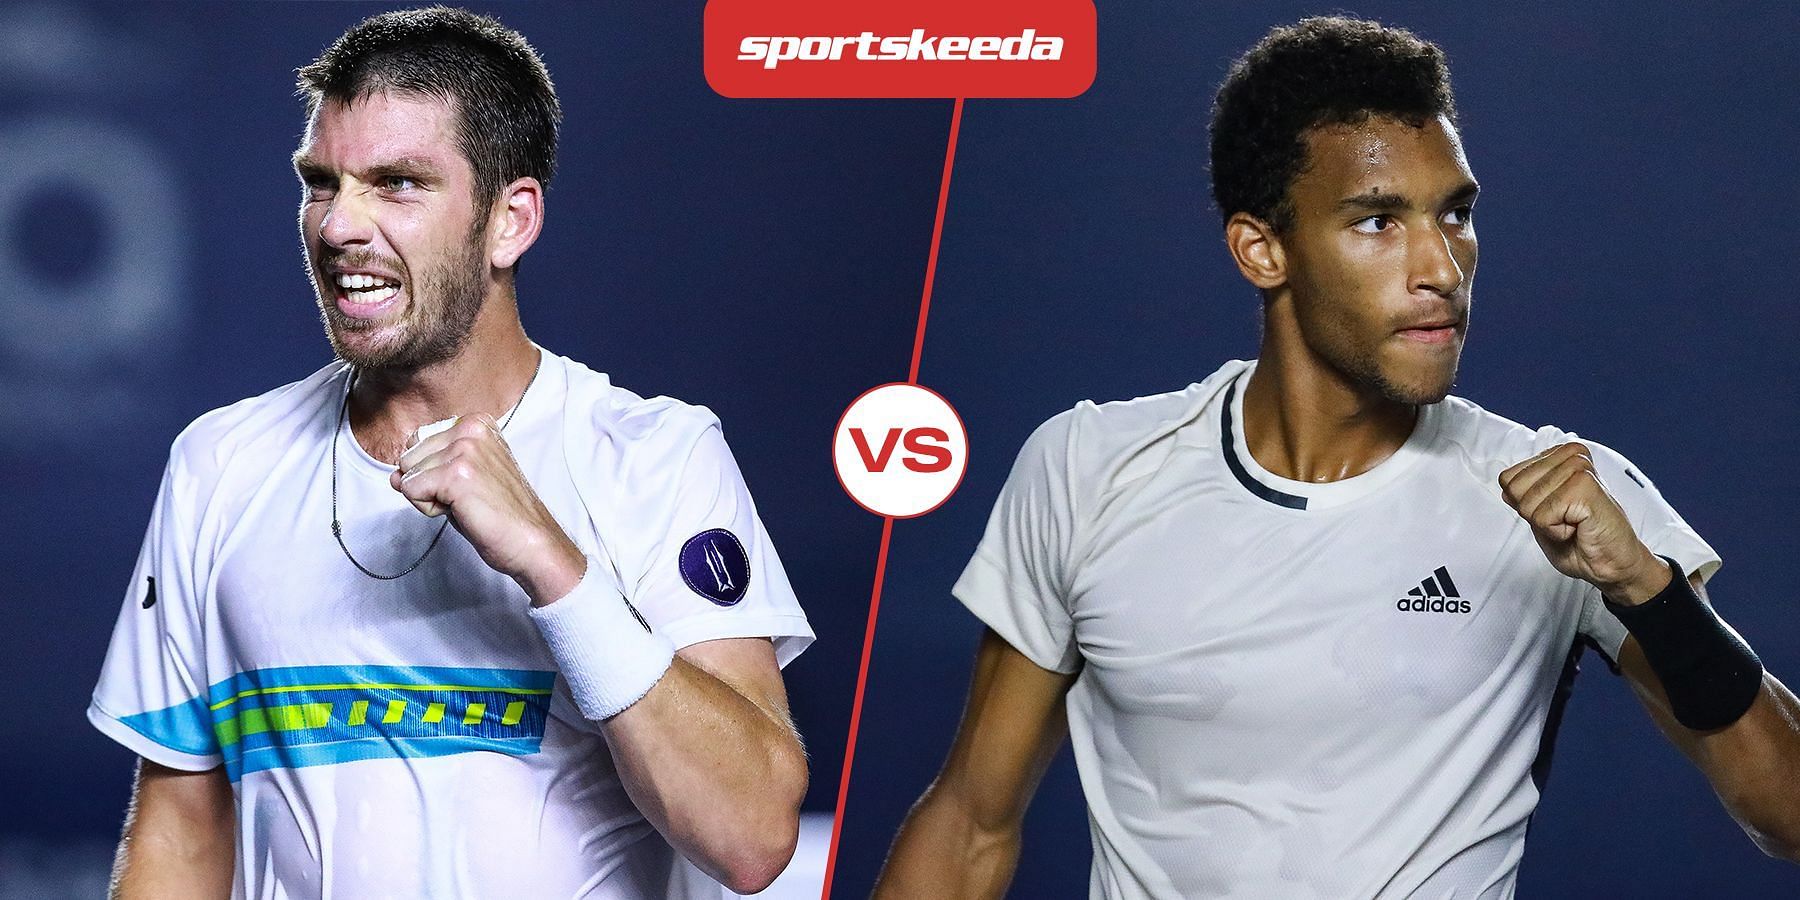 Felix Auger-Aliassime will take on Cameron Norrie in the semifinals of the Los Cabos Open